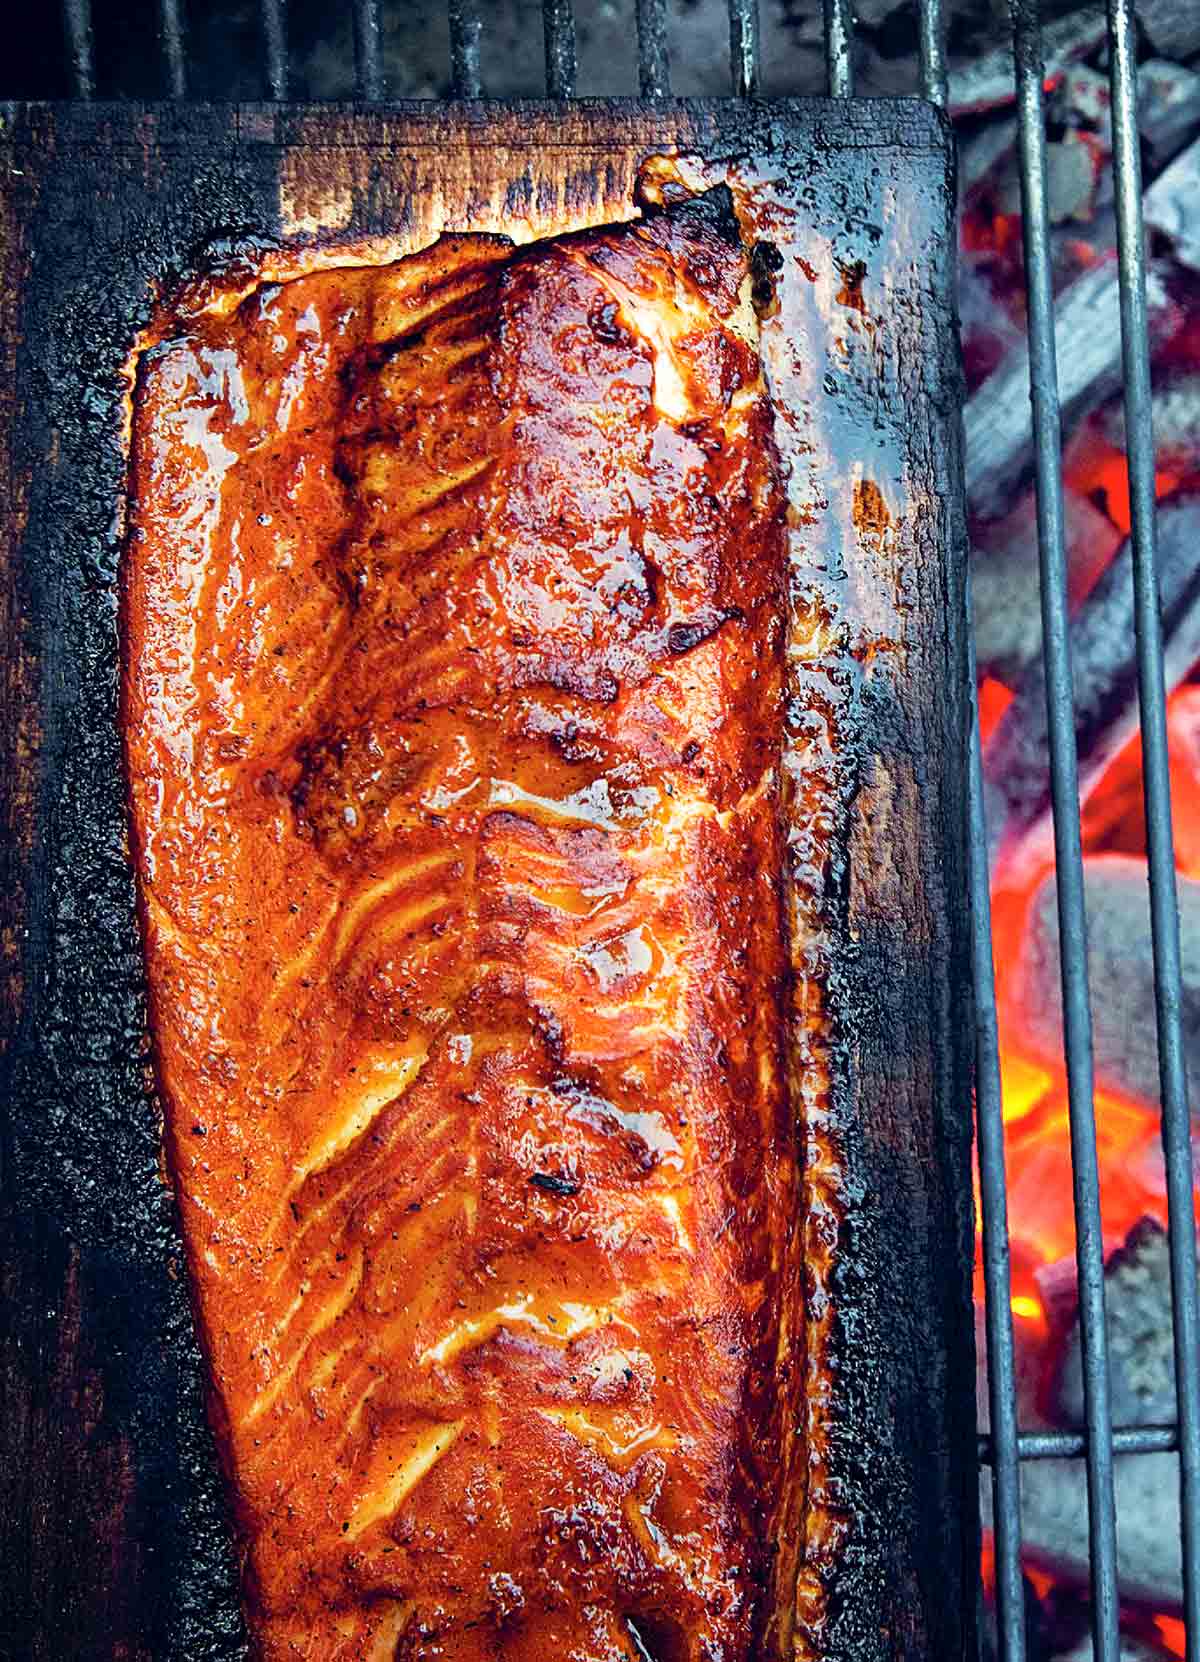 A fillet of grilled salmon on a cedar plank over hot coals.